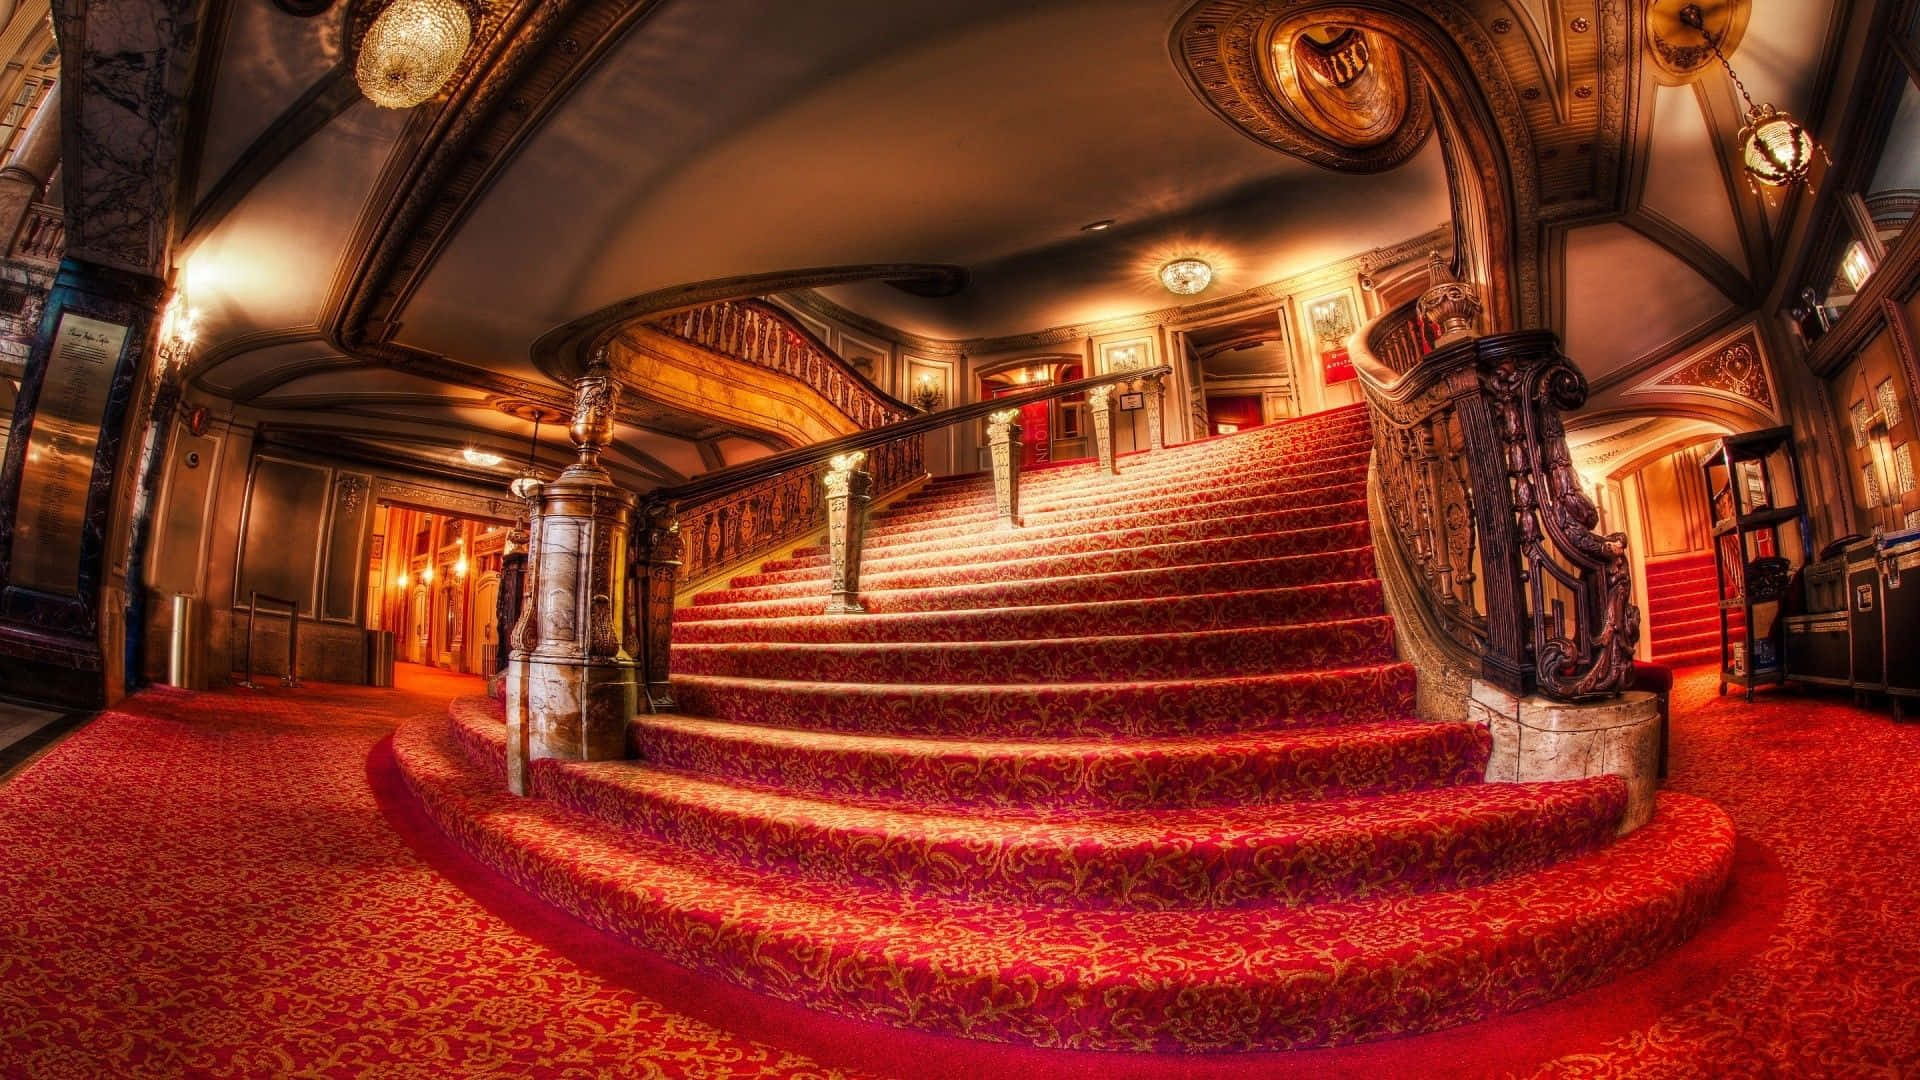 A Staircase With Red Carpet And Ornate Decorations Wallpaper